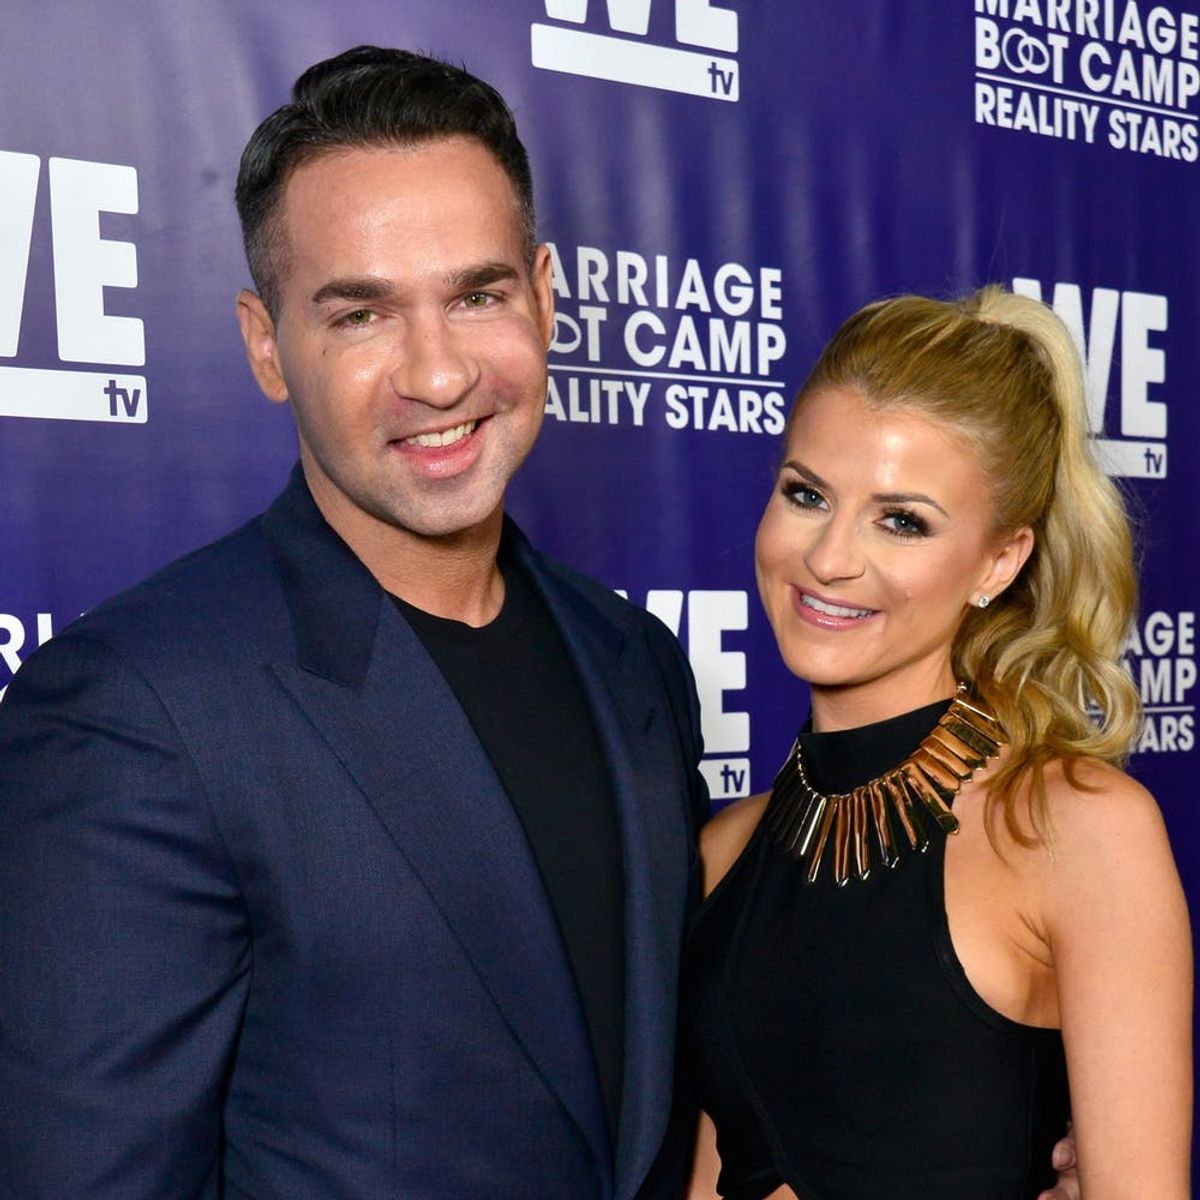 ‘Jersey Shore’ Star Mike ‘The Situation’ Sorrentino Is Engaged!